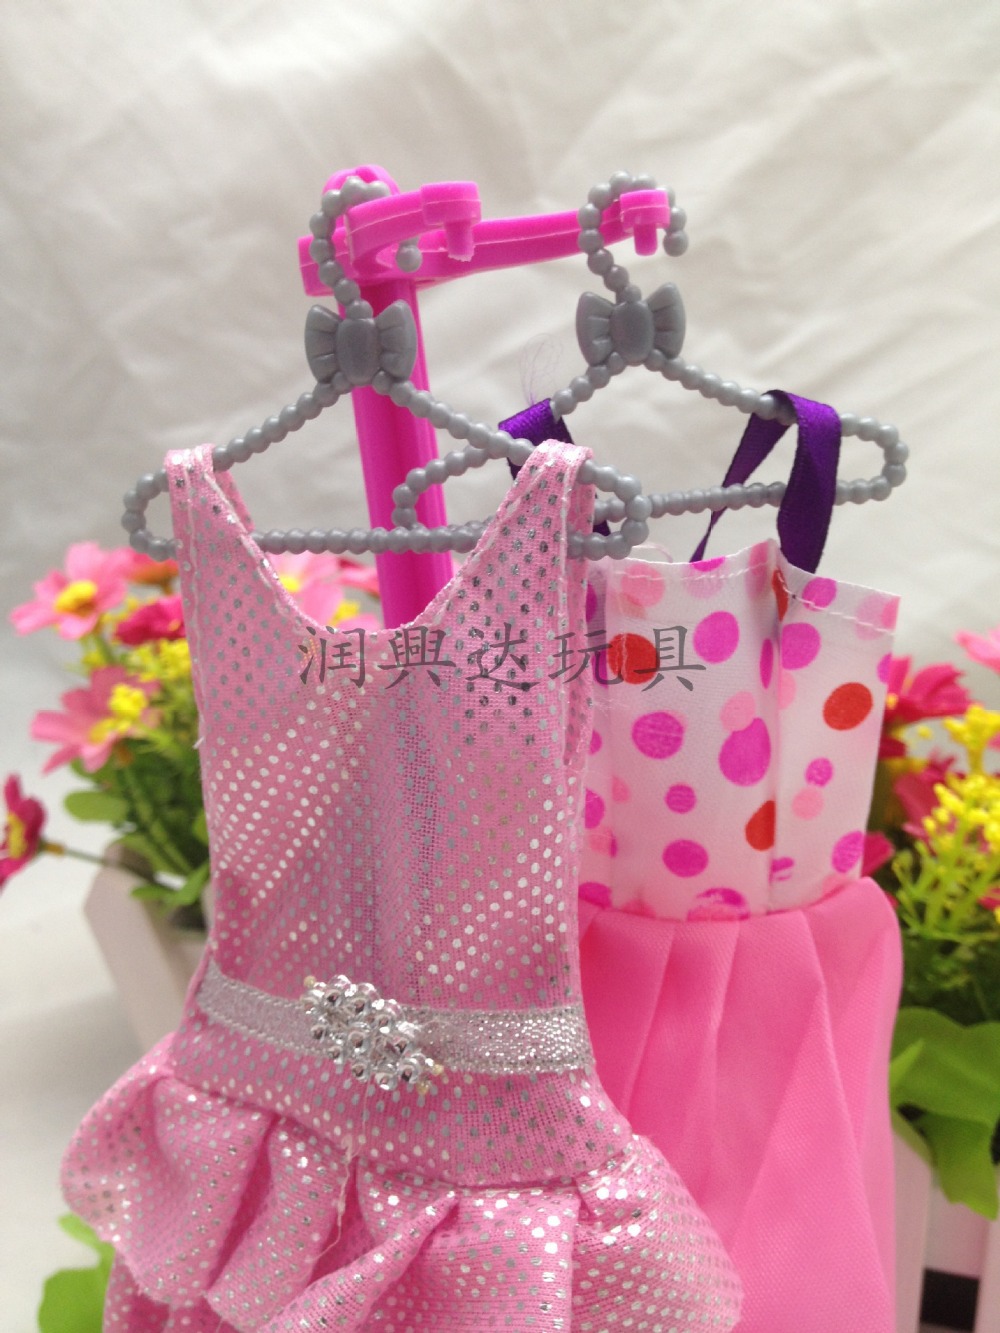 Free Shipping Clothes Hangers for 1/6 Dolls & Other Dolls Useful Accessories Silver Gray Color Bow Design Doll Hangers Wholesale